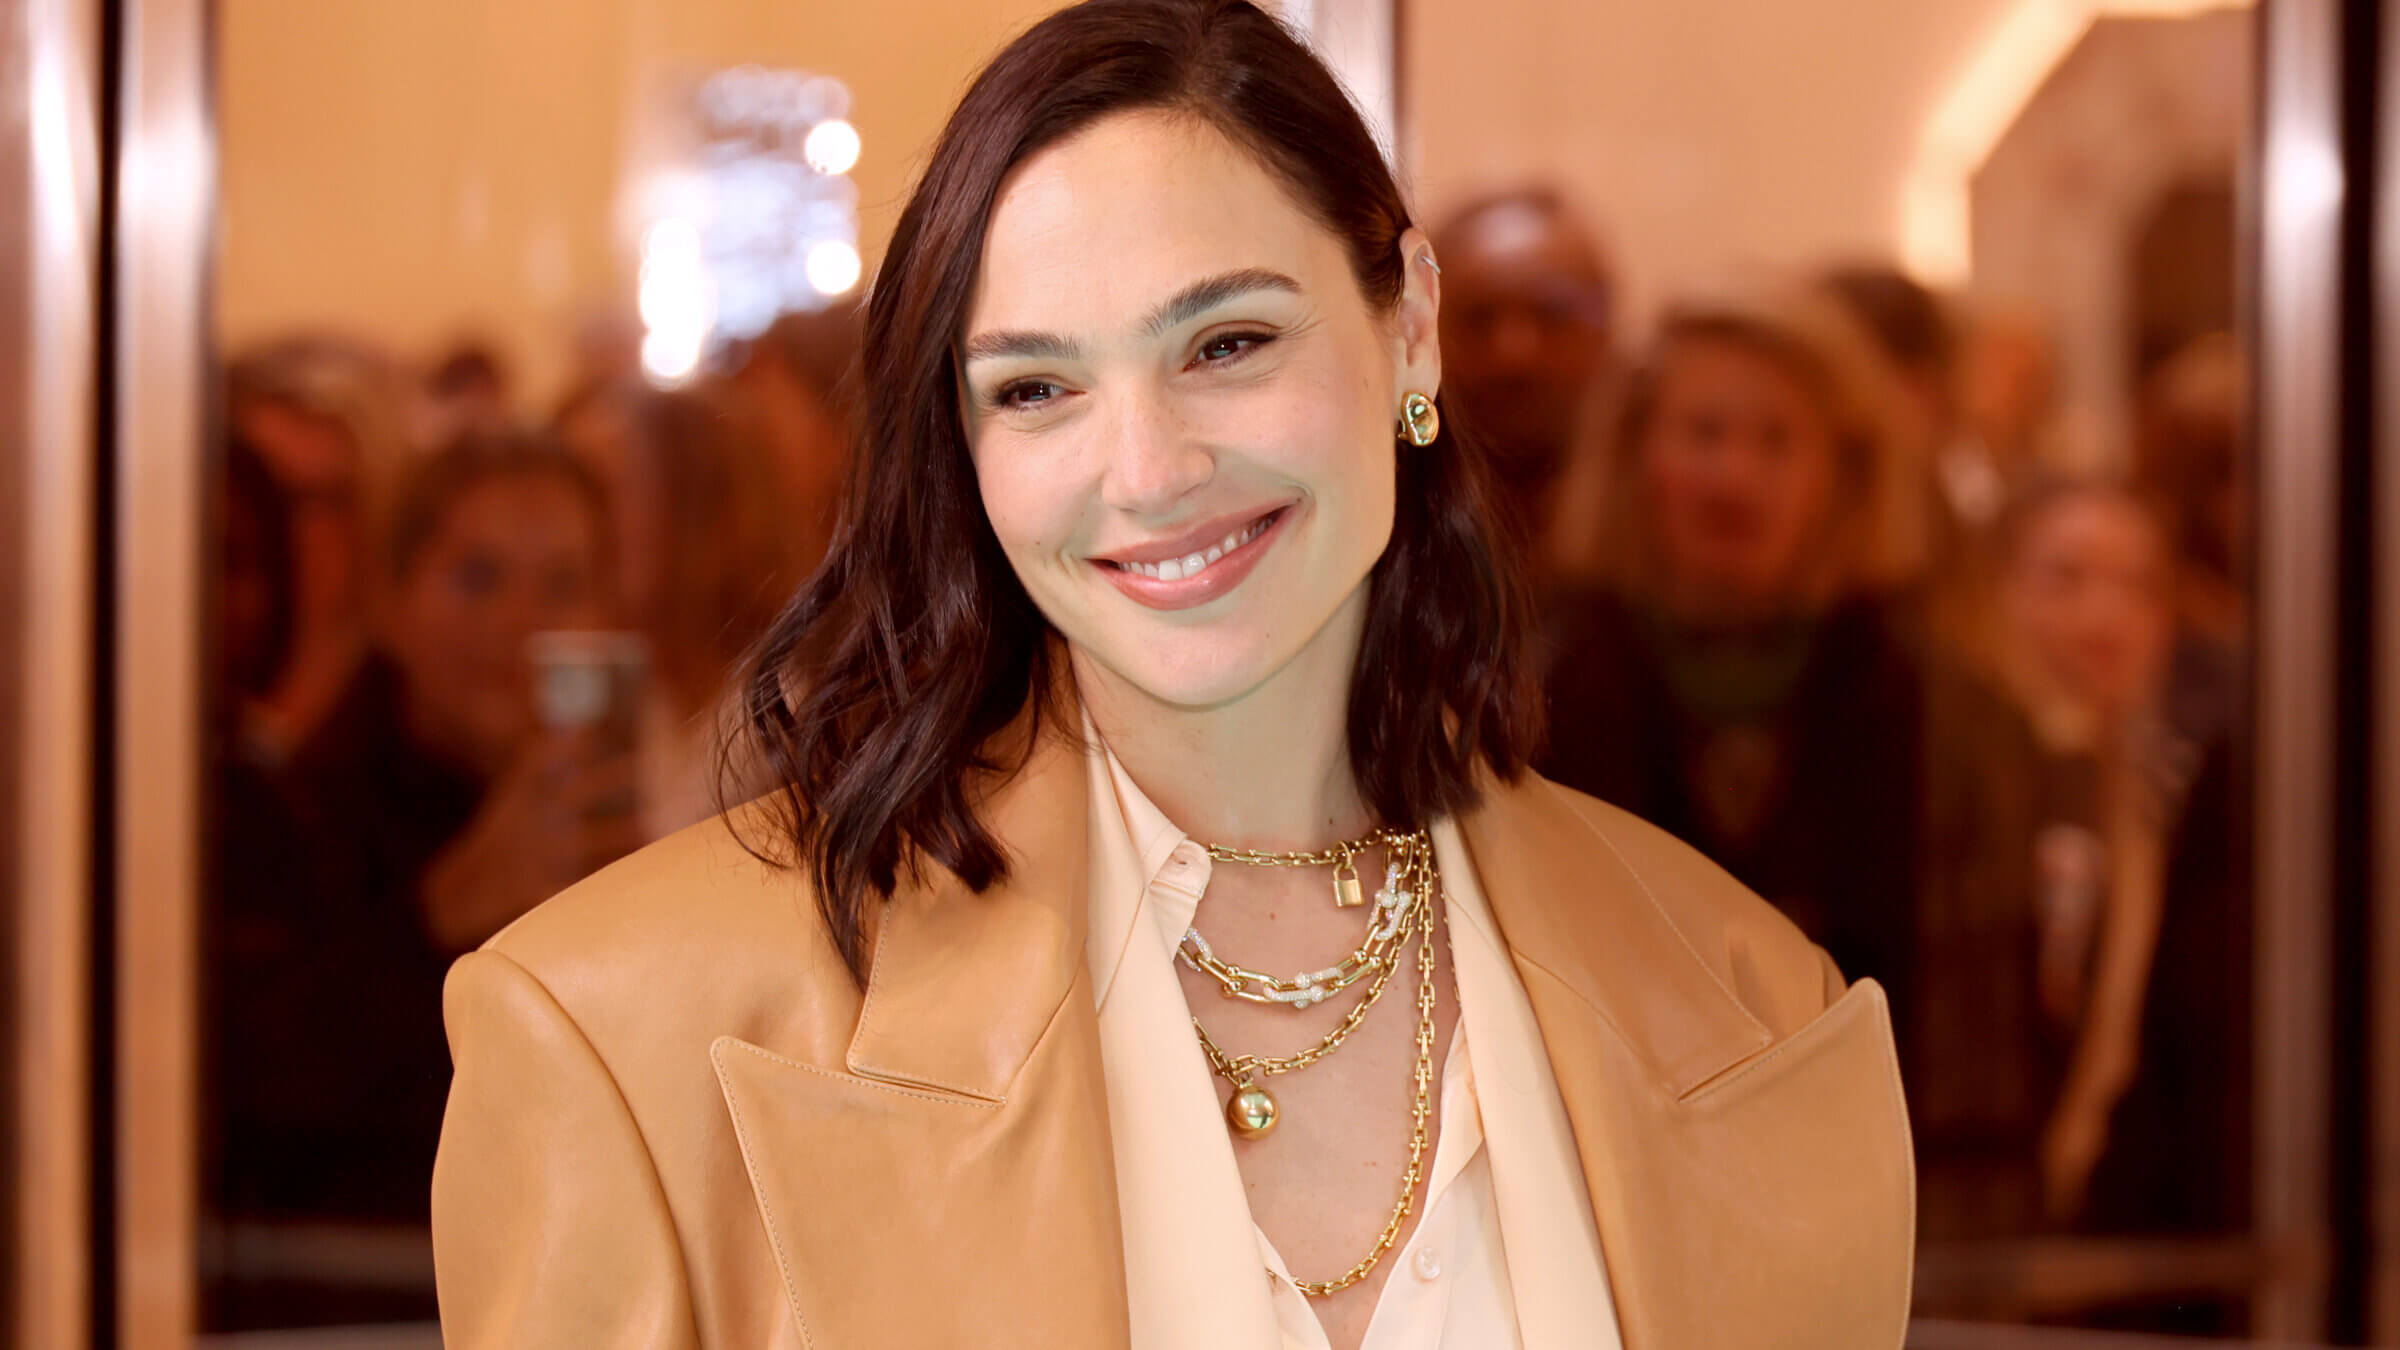 Gal Gadot smiling earlier this year.